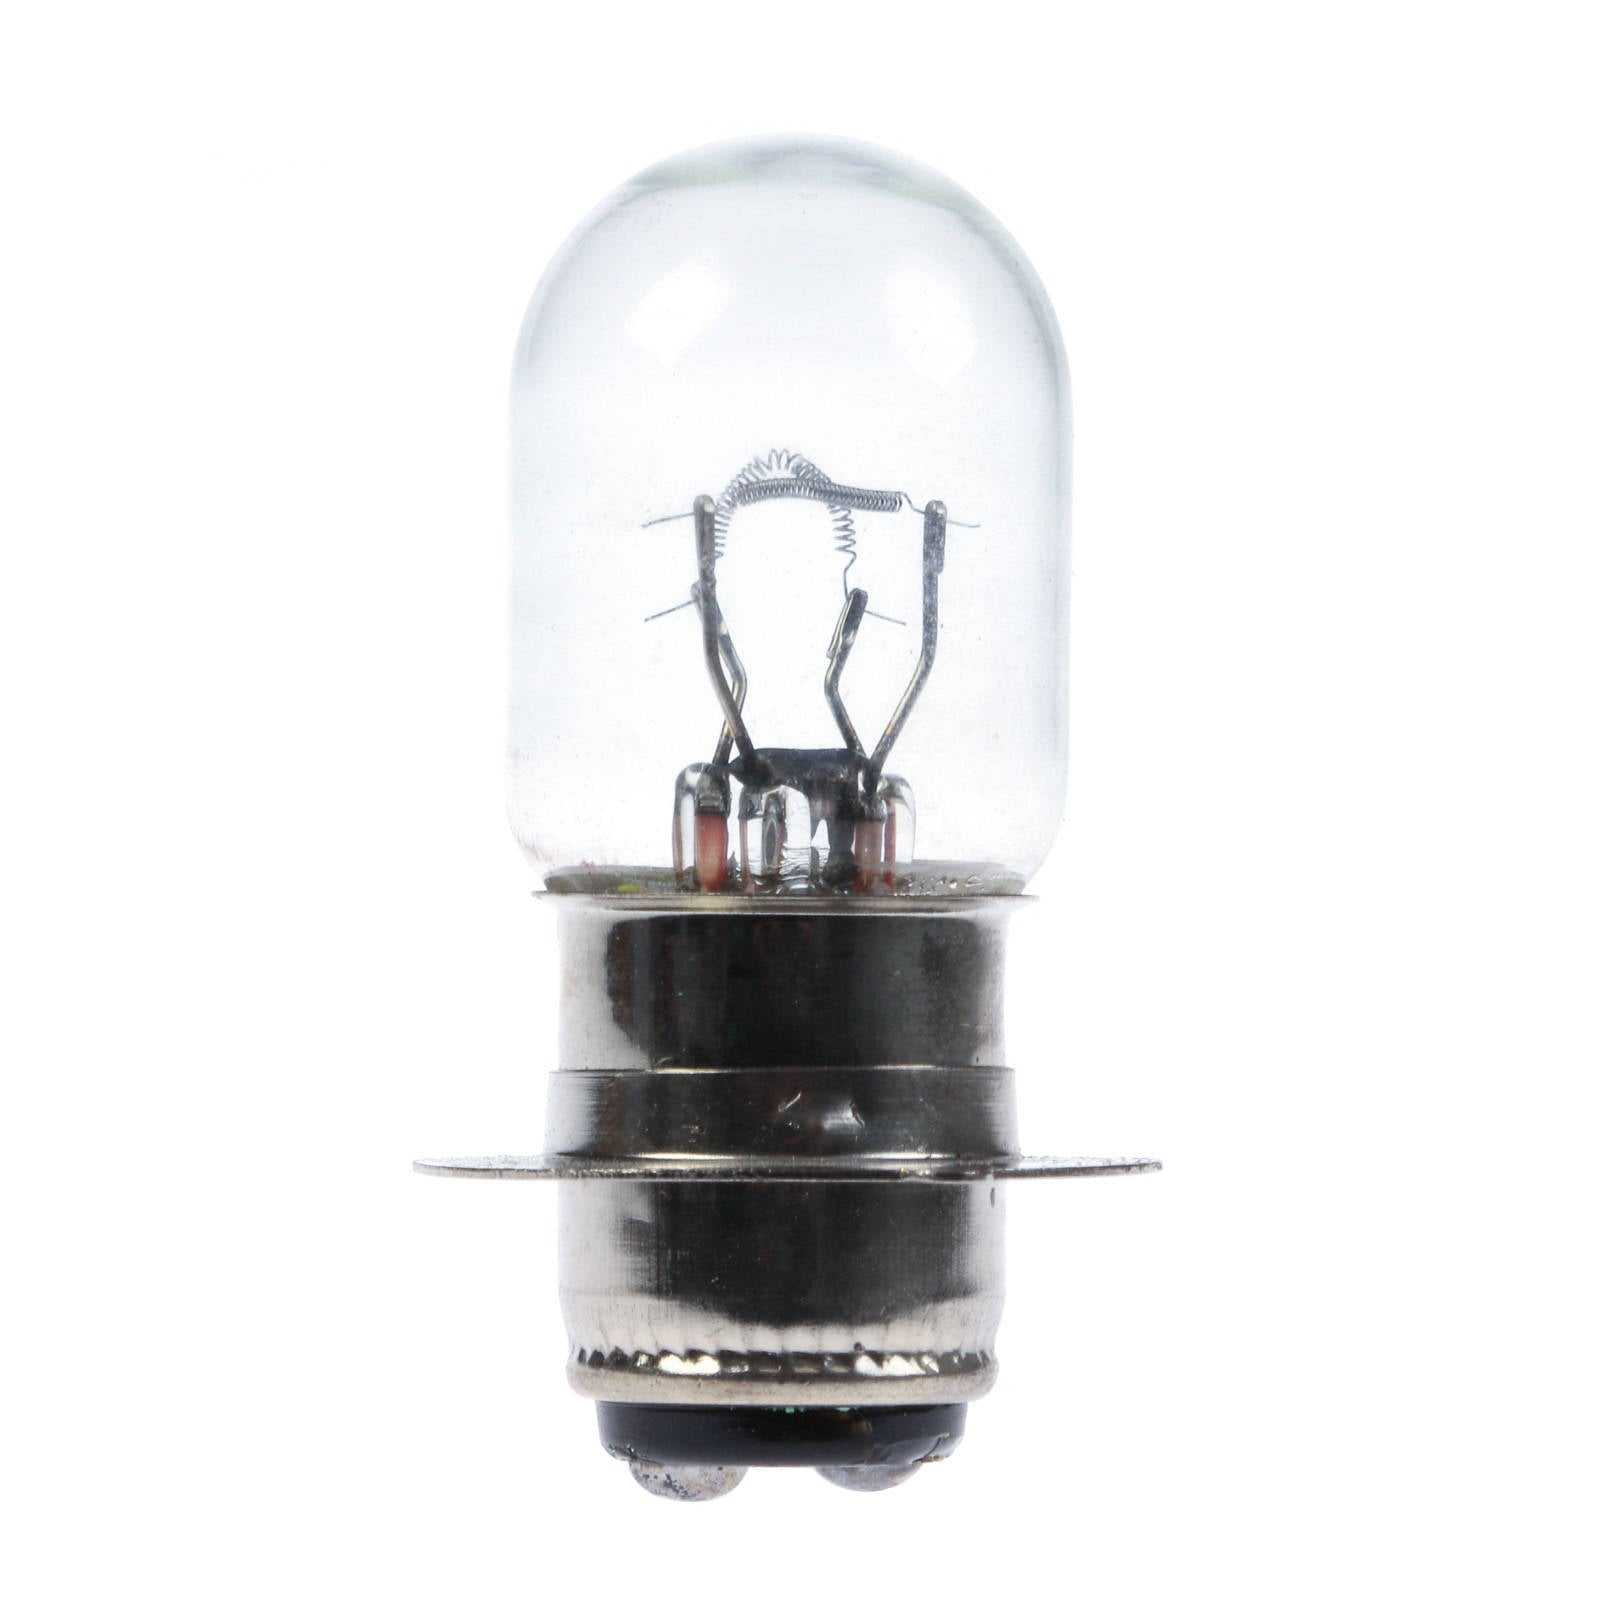 Whites Motorcycle Parts, BULBS 12V 35/35W H/L (P15D-25-1/H6M) (A3605) (Pkt of 10)